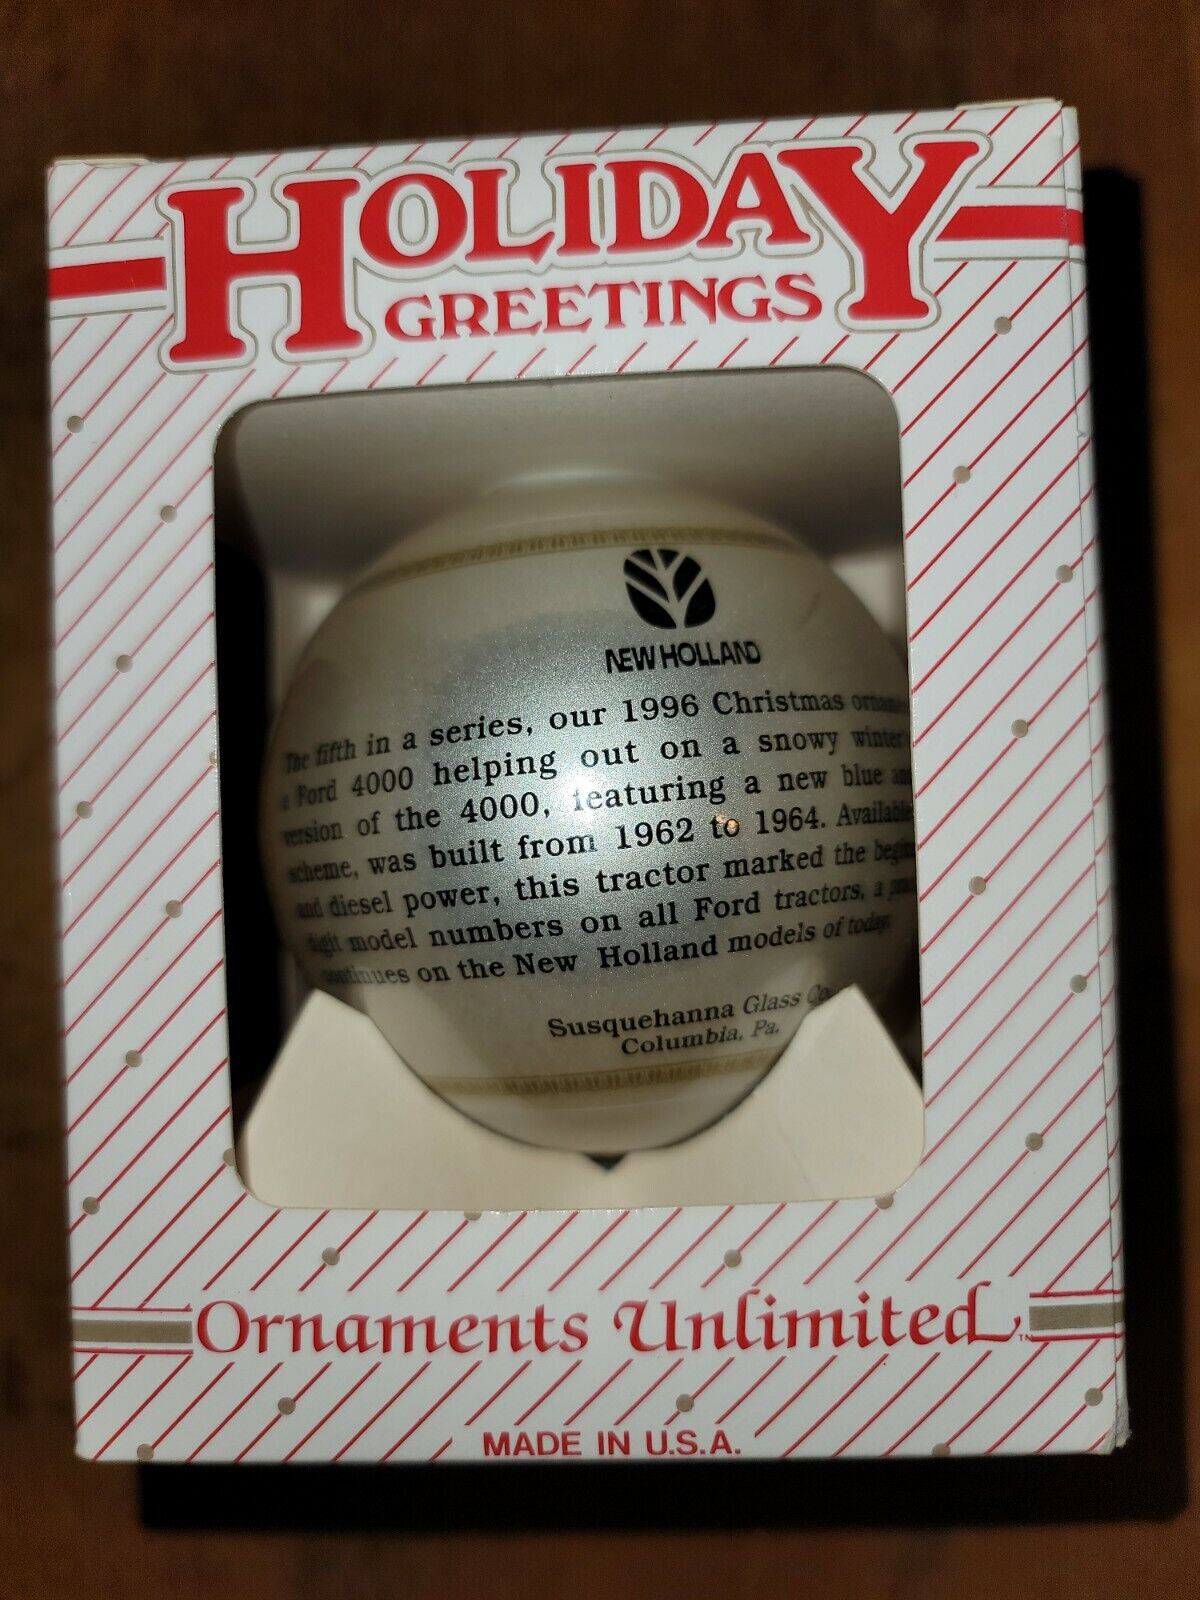 VINTAGE New Holiday Greetings 1996 New Holland Christmas Ornaments Unlimited